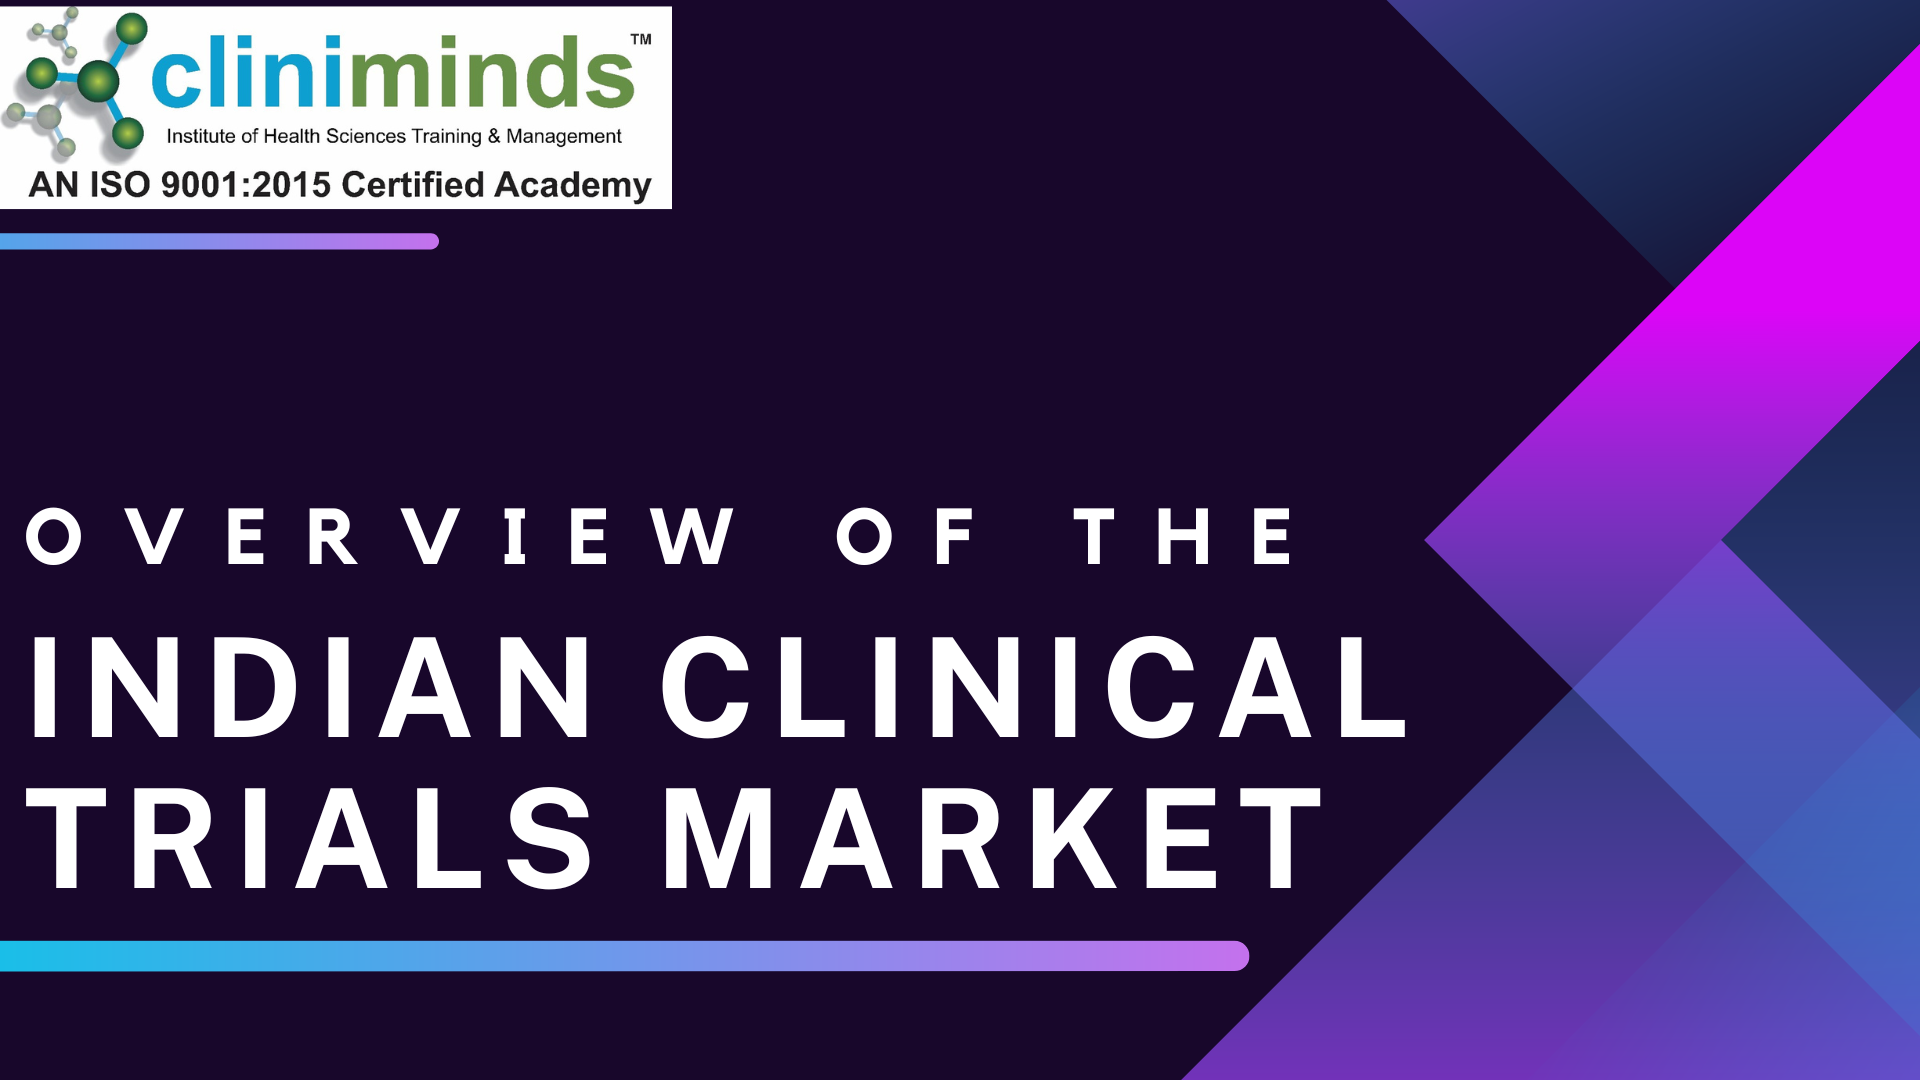 Overview of the Indian Clinical Trials Market